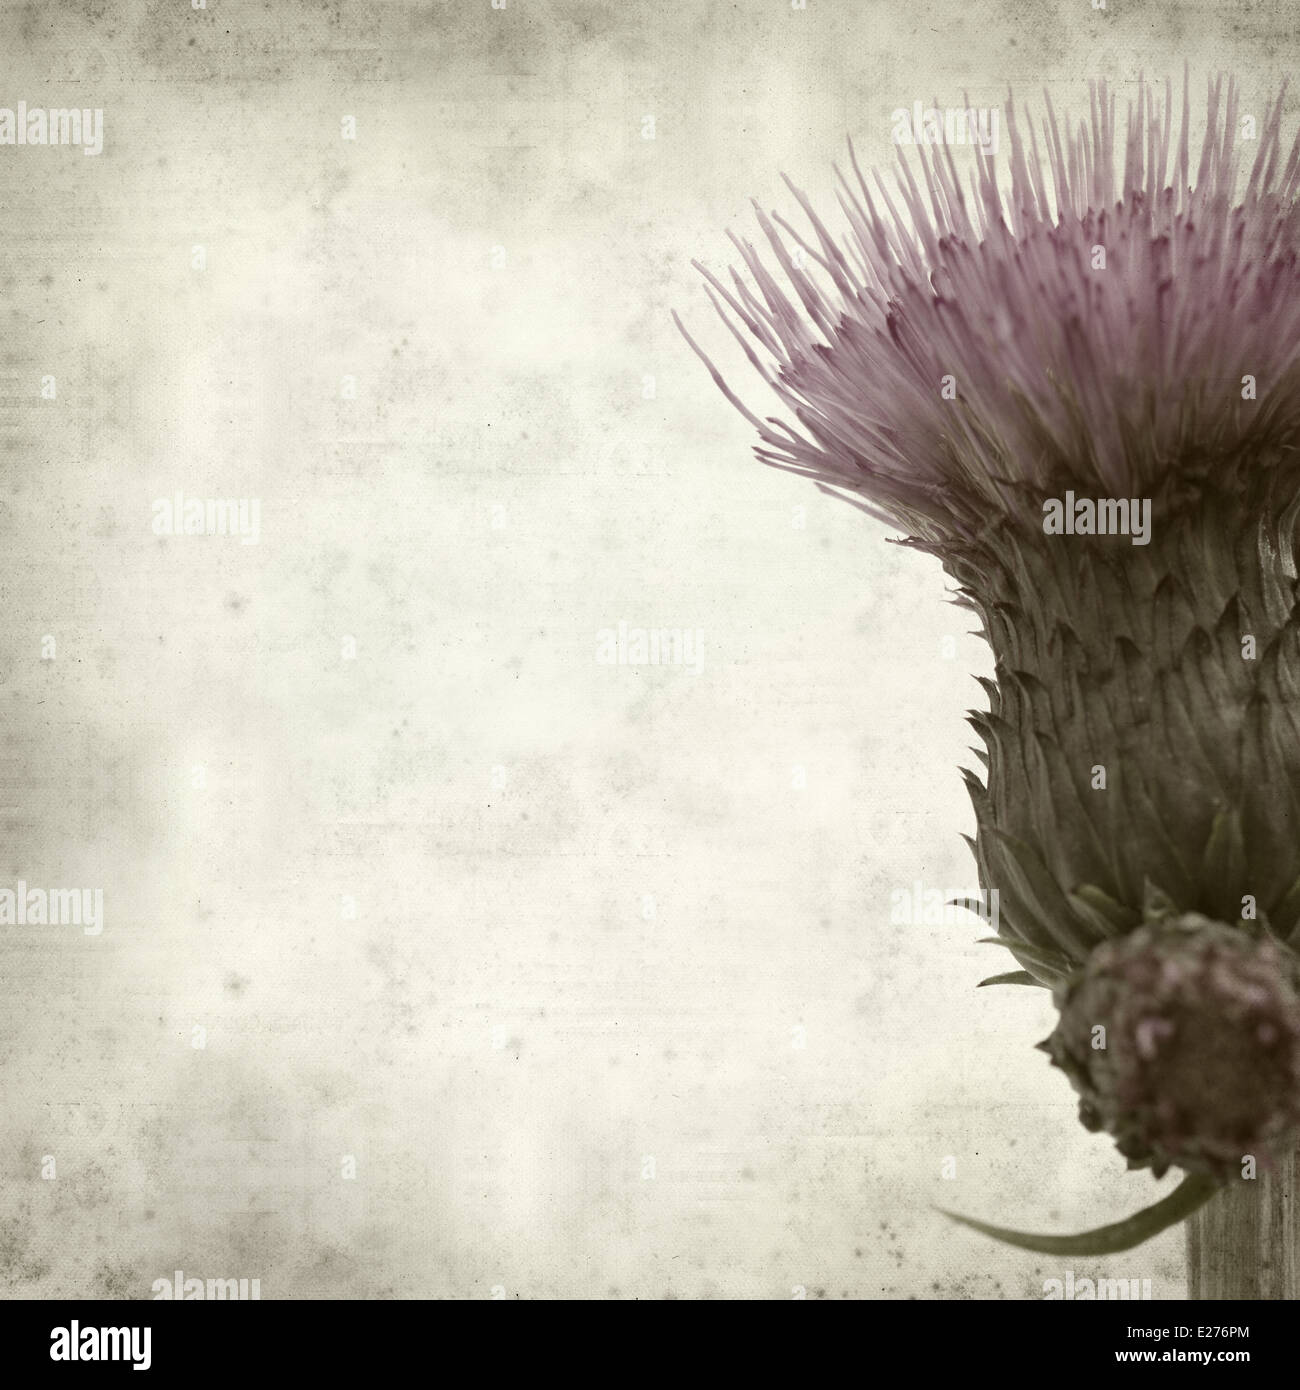 textured old paper background with thistle Stock Photo